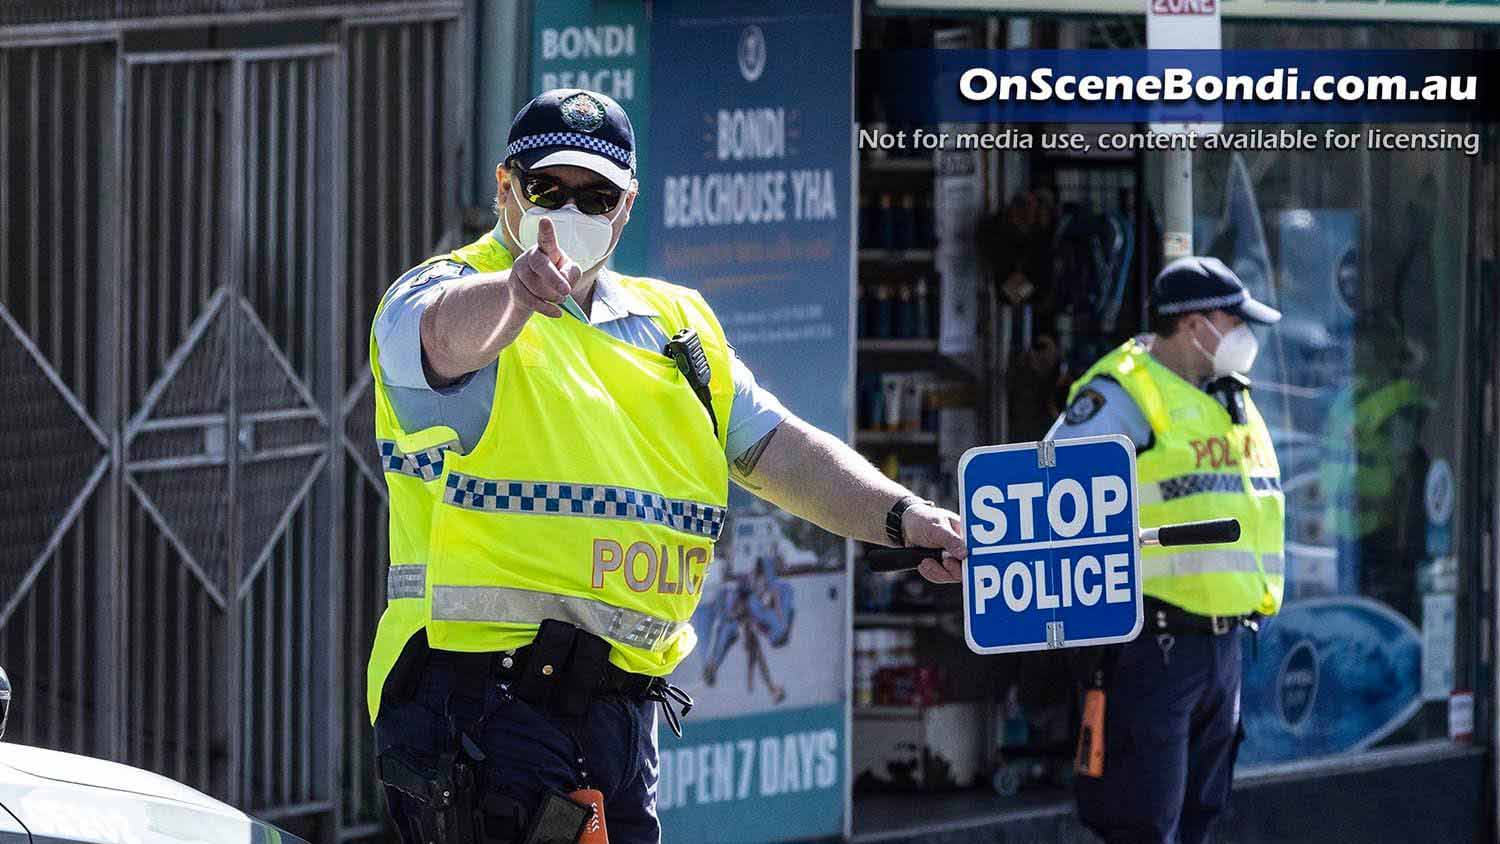 Police establish checkpoints in Bondi and Coogee to enforce health orders